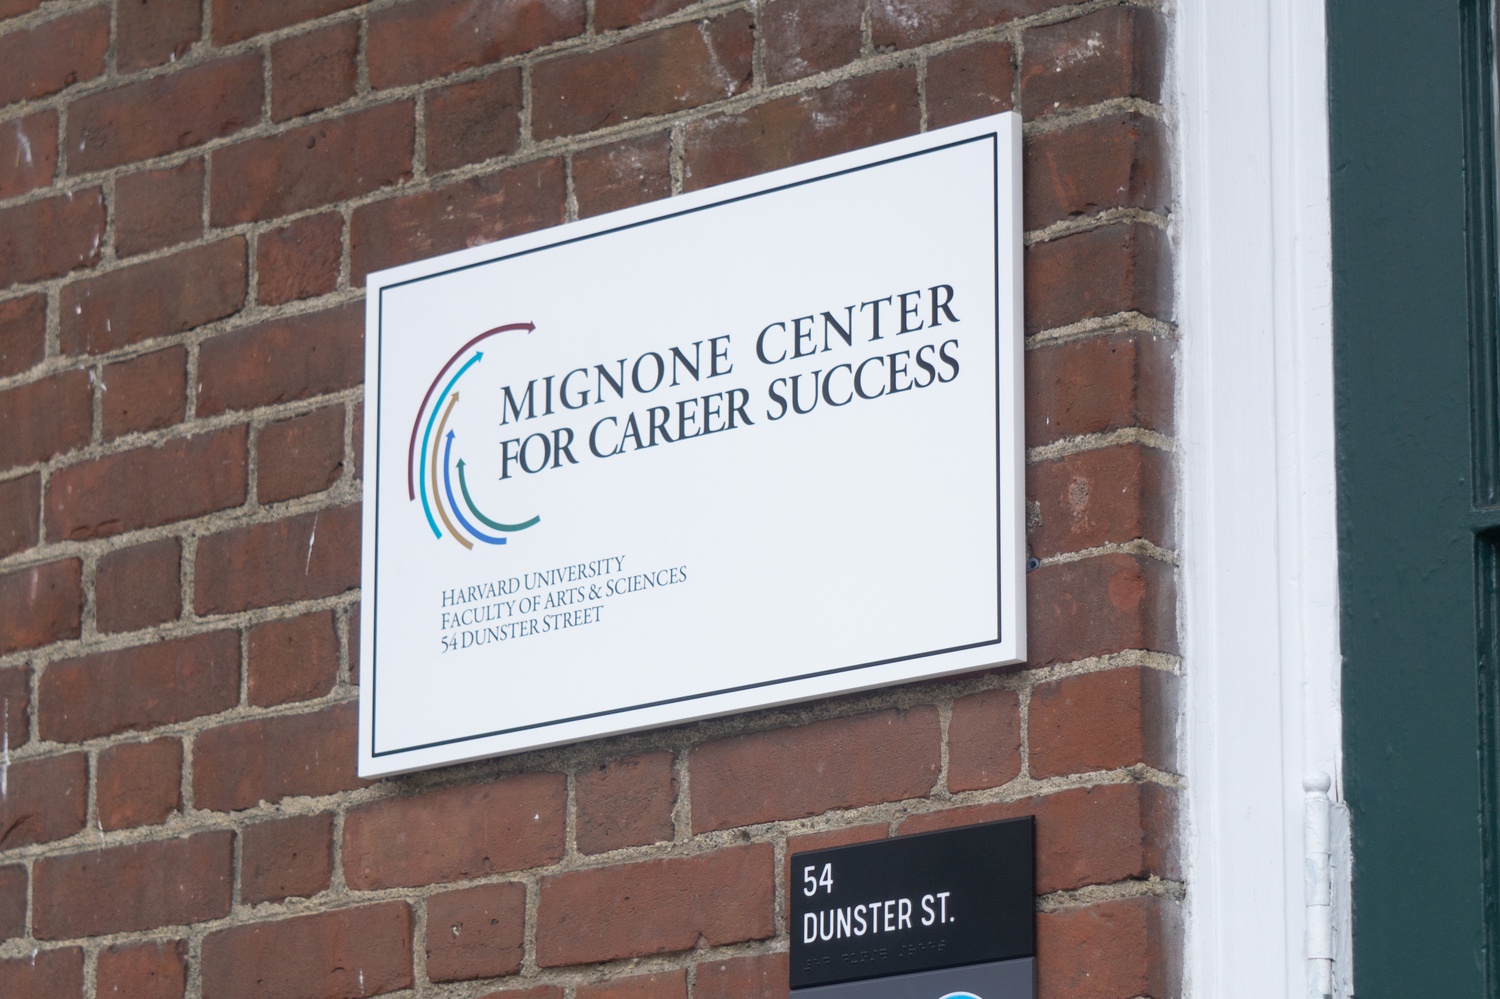 The newly renamed Mignone Center for Career Success is located at 54 Dunster St.